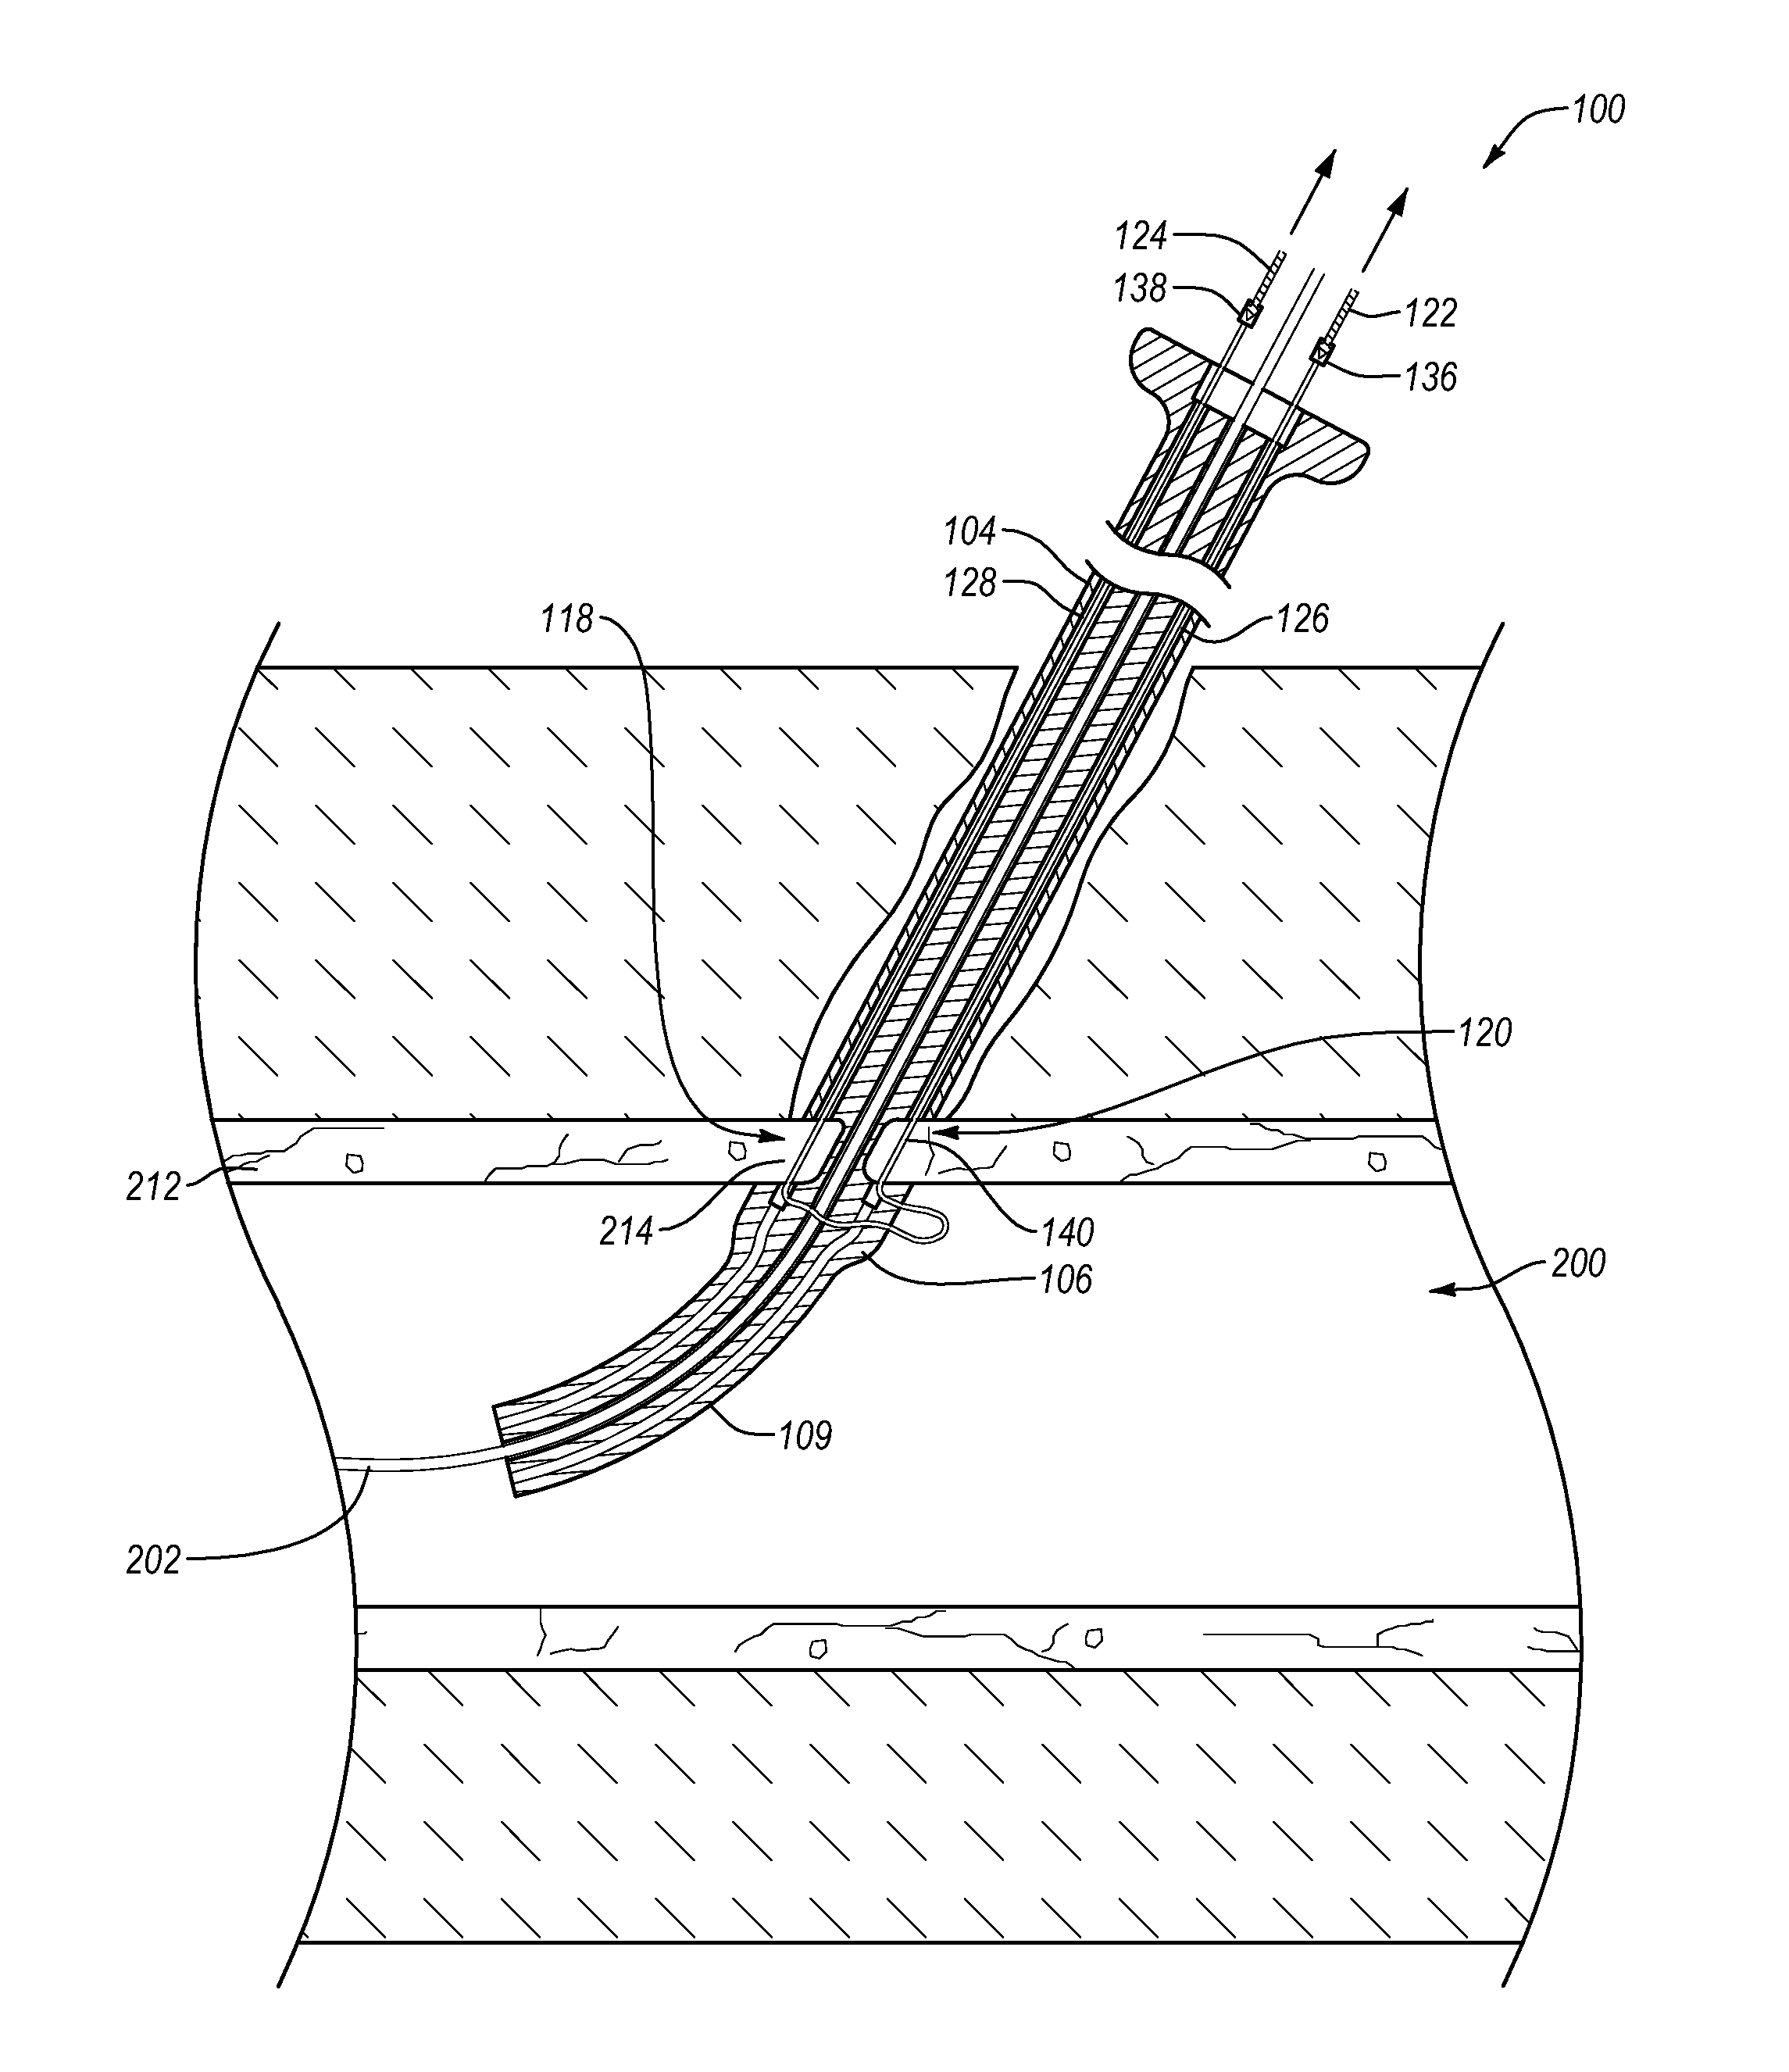 Suturing devices and methods